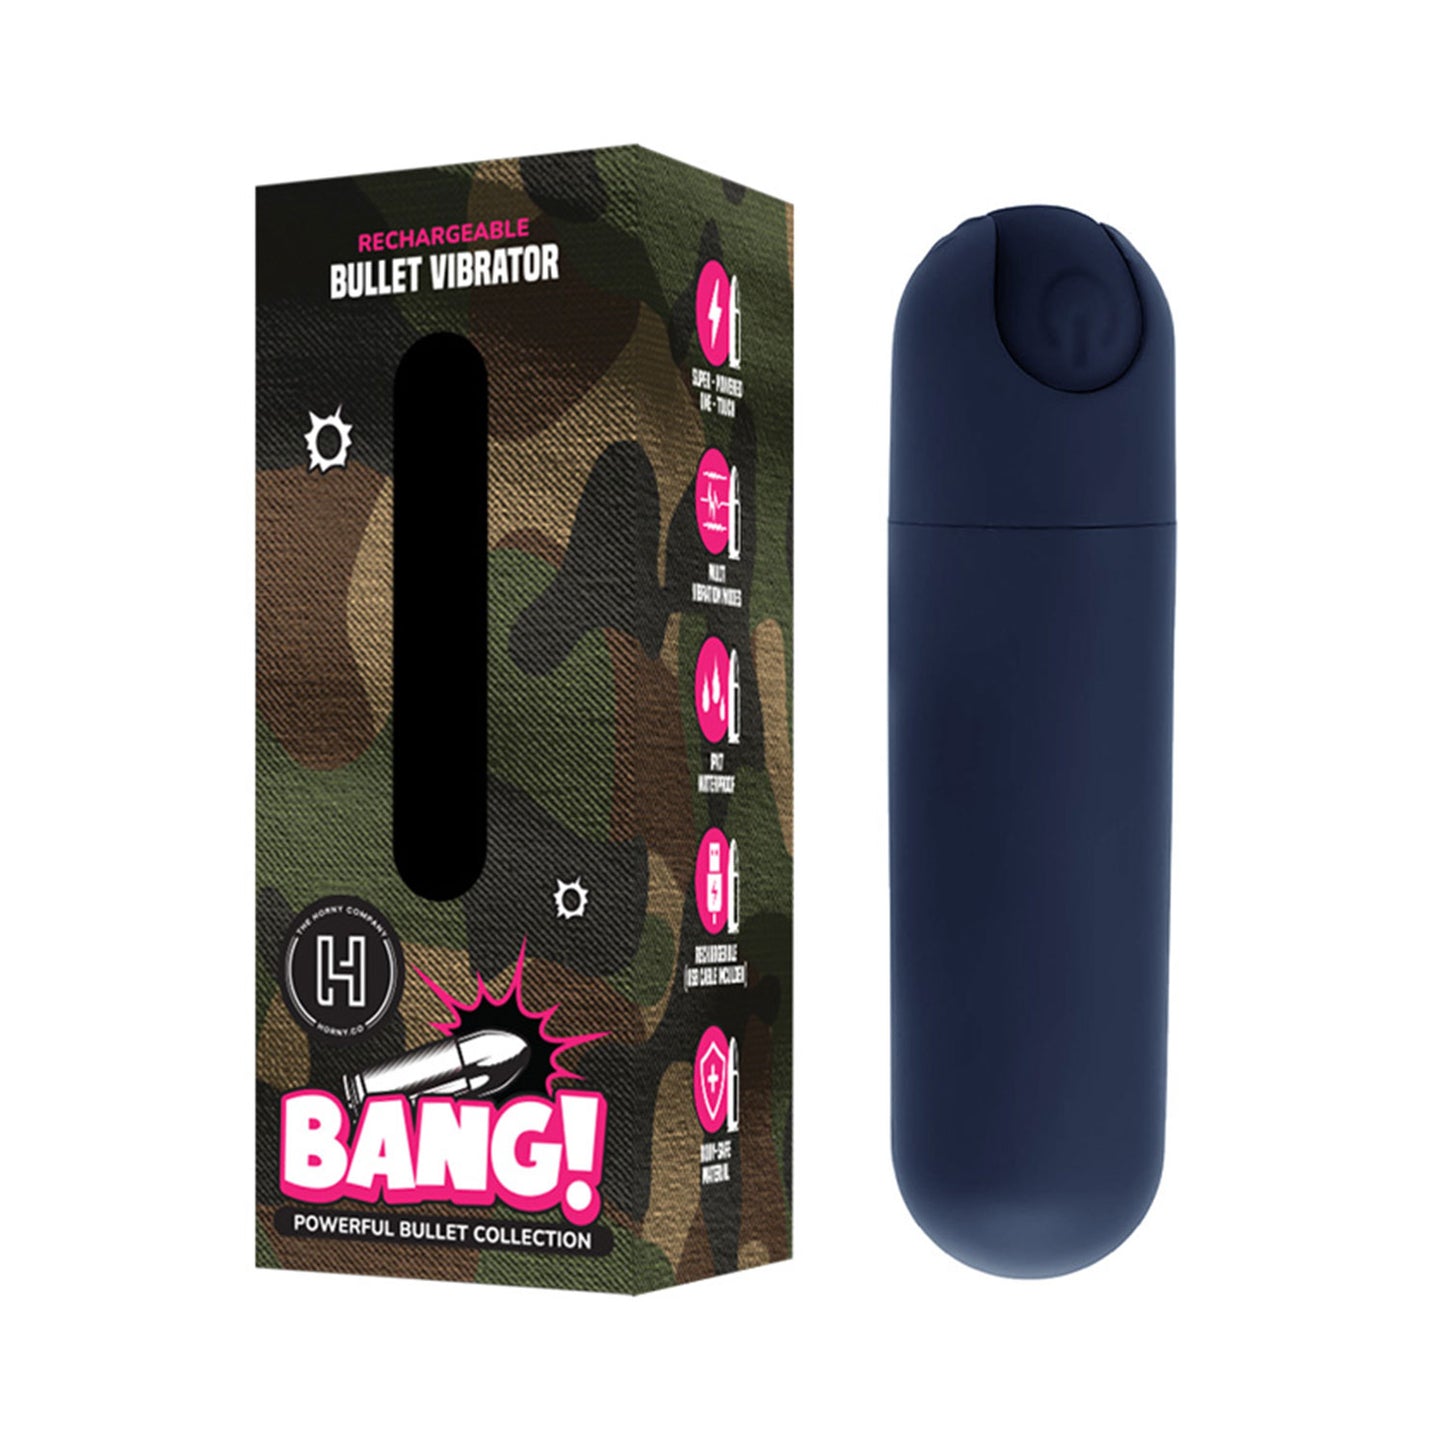 The Horny Company - Bang! Rechargeable Bullet Vibrator Navy Blue